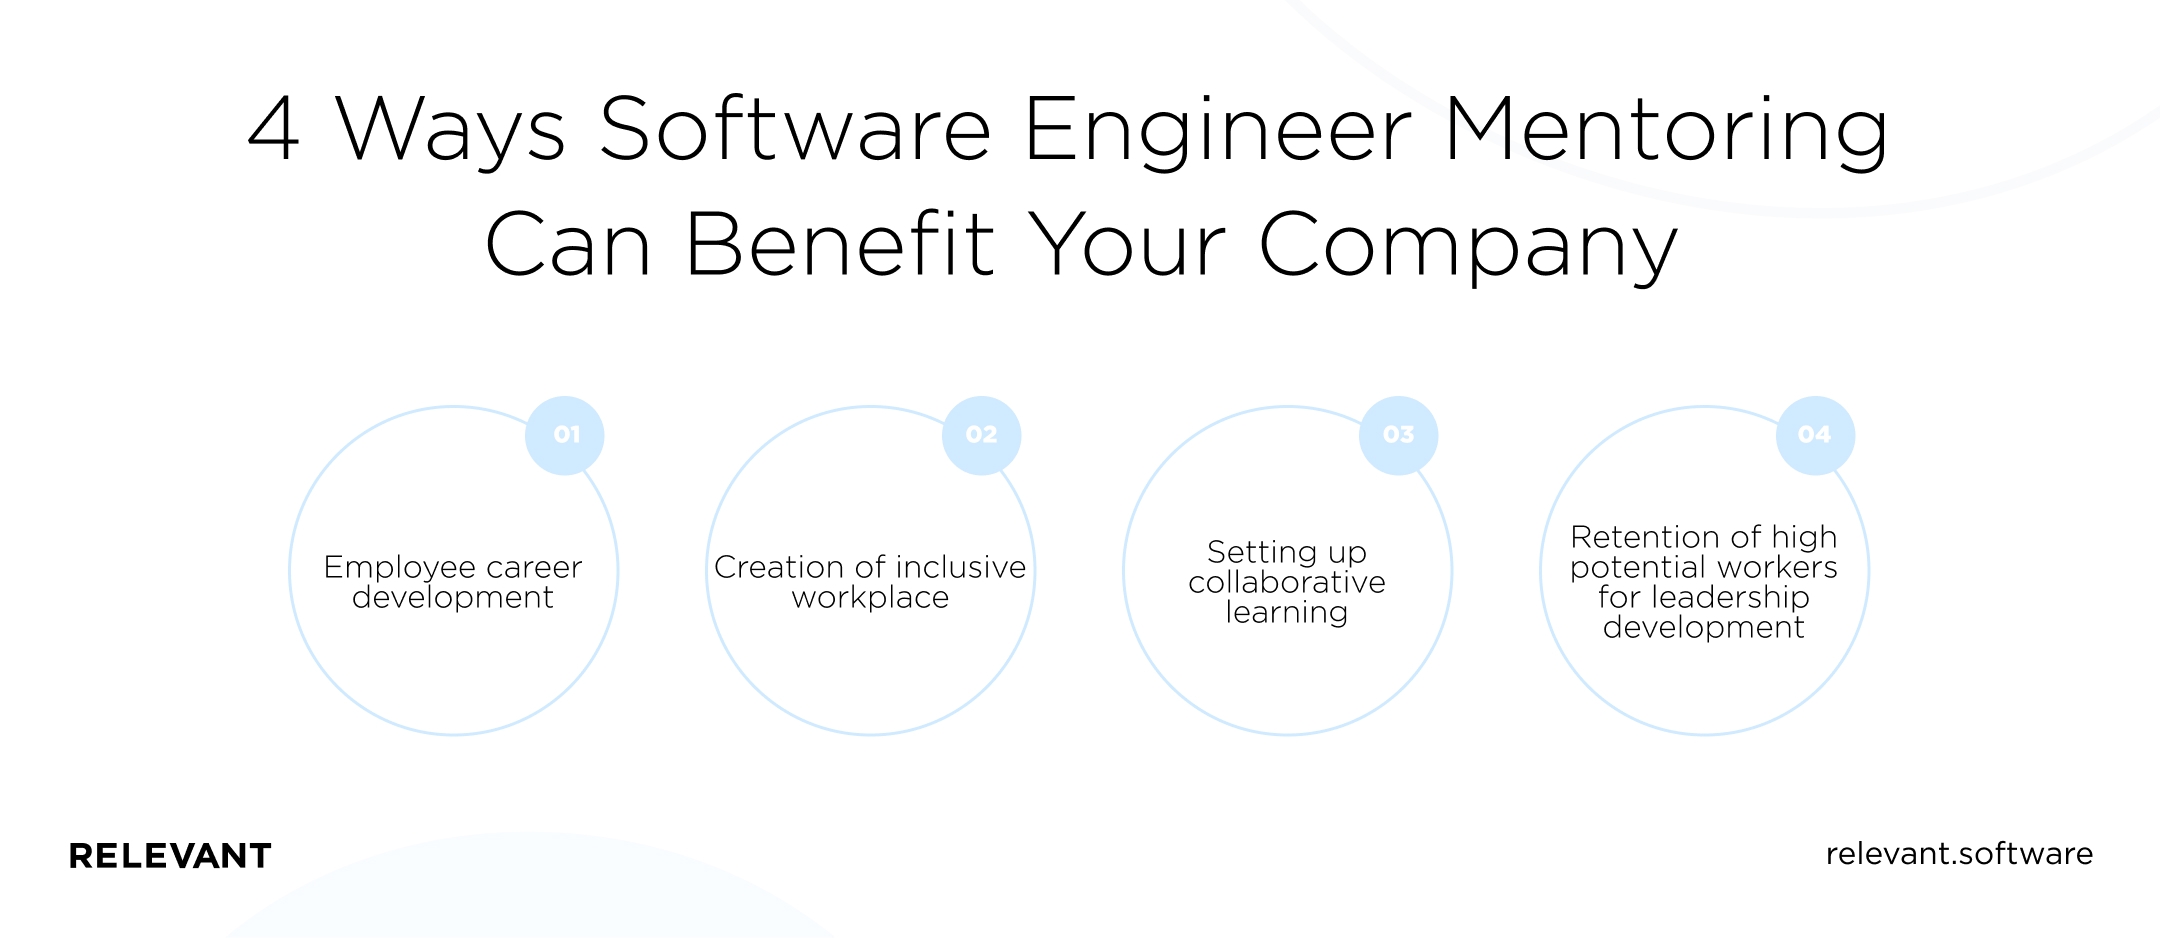 4 Ways Software Engineer Mentoring Can Benefit Your Company